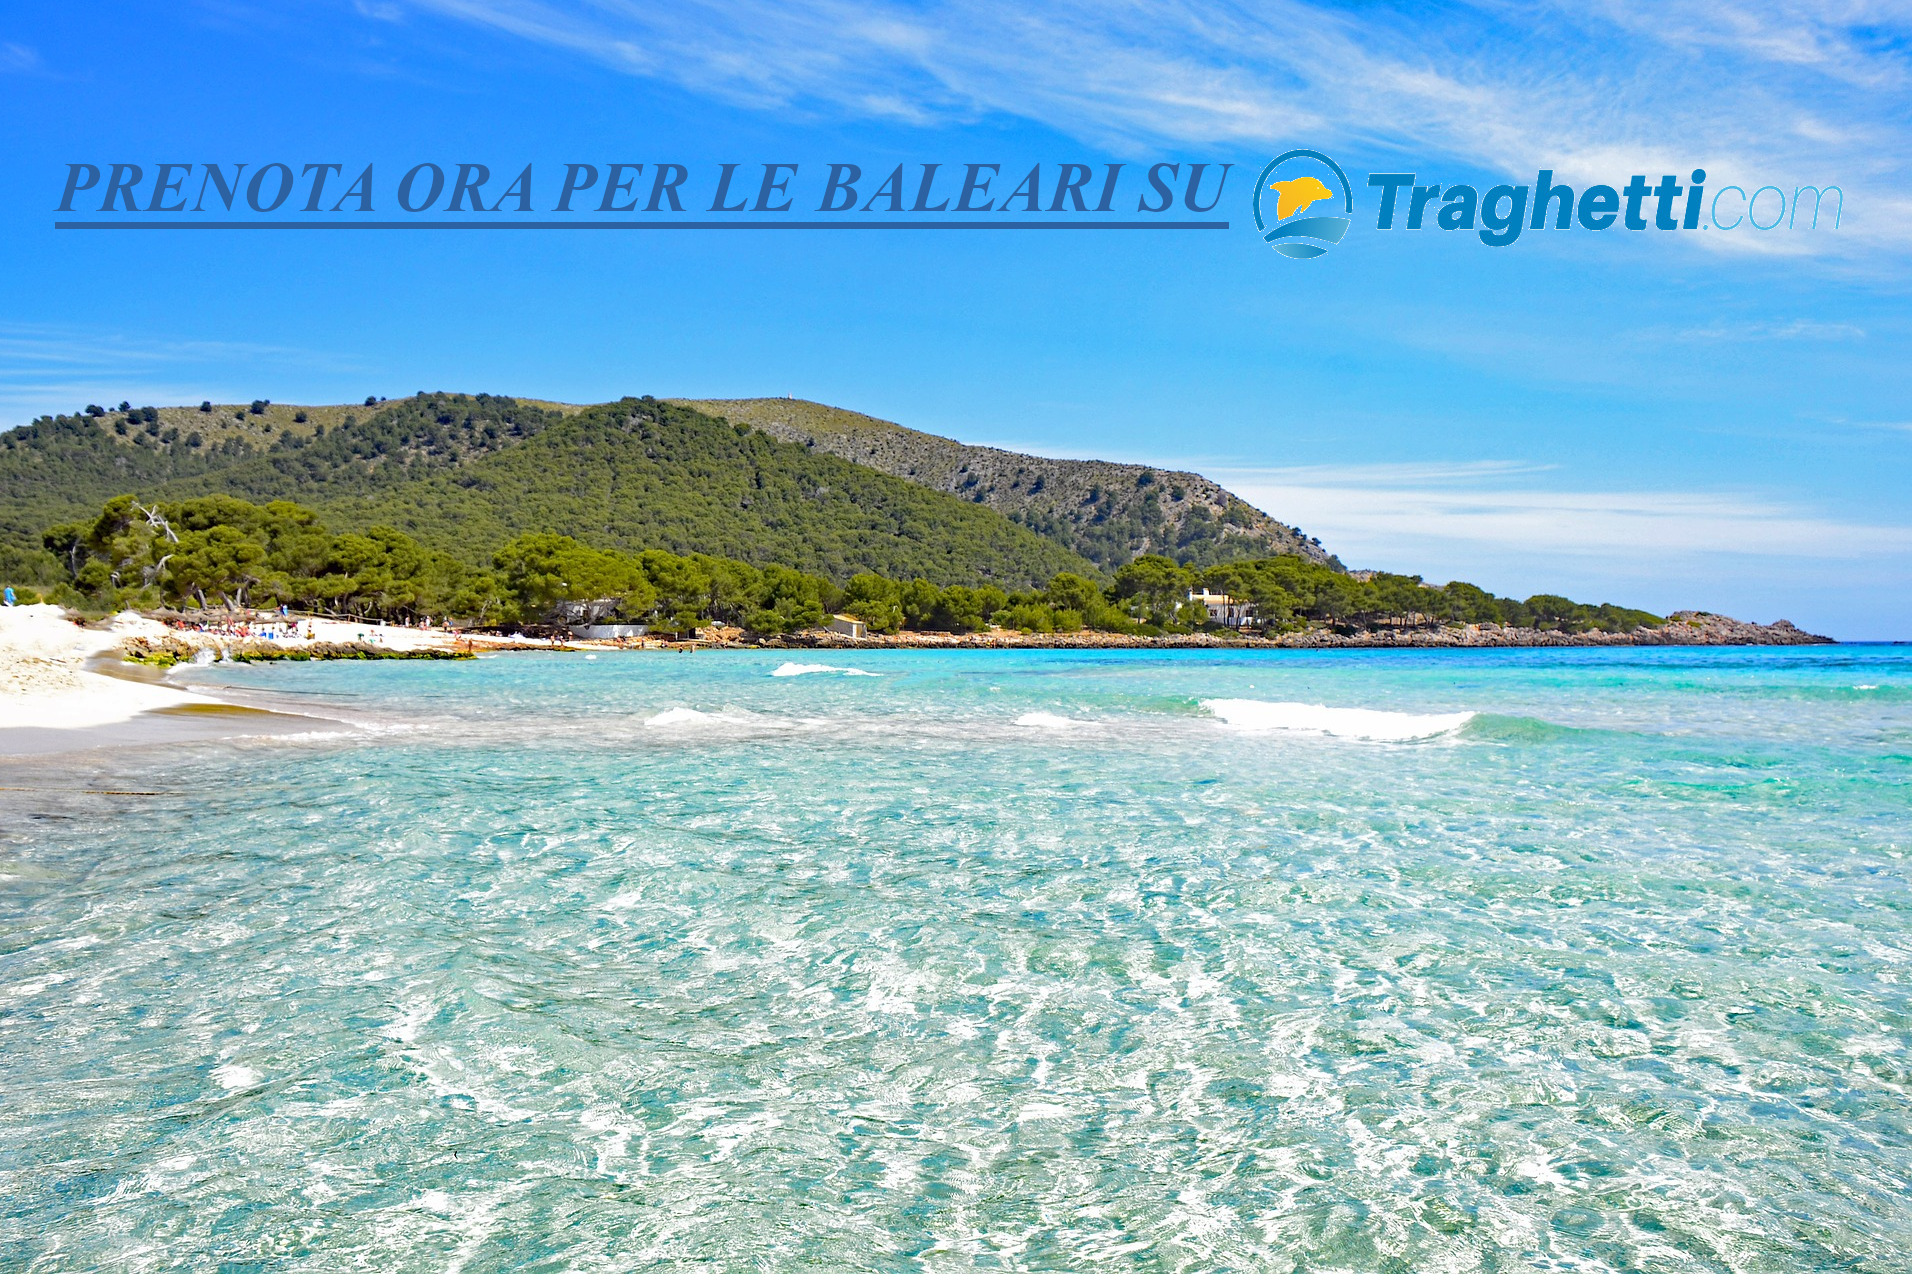 GNV TAKES YOU TO BALEARIES AT LOW PRICES